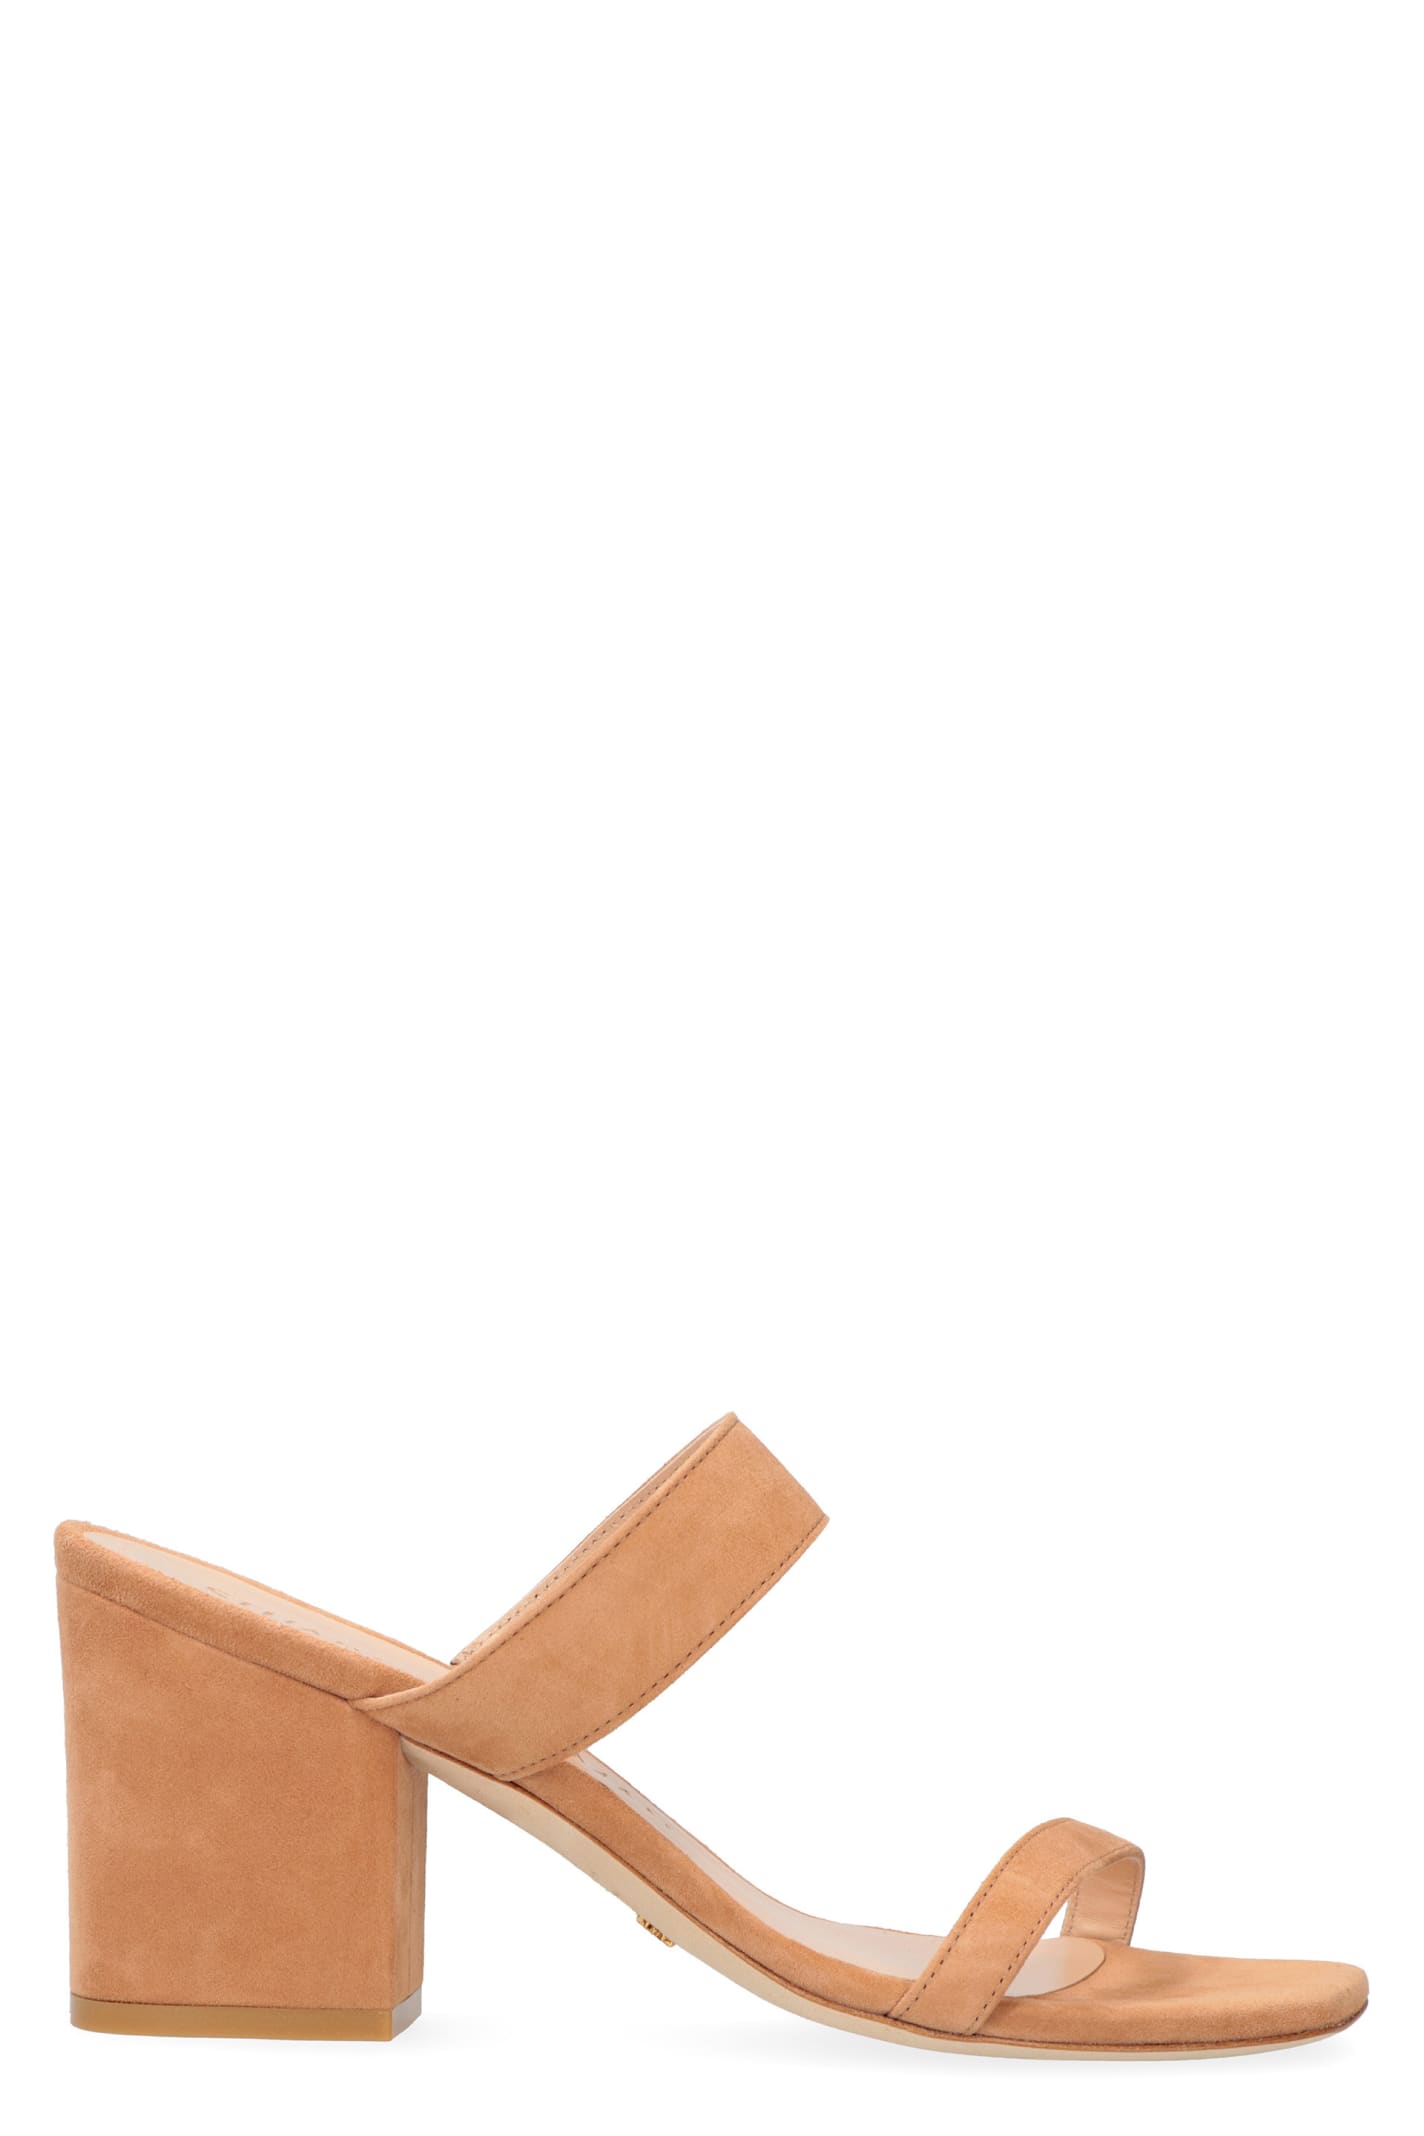 Buy Stuart Weitzman Olive Suede Mules online, shop Stuart Weitzman shoes with free shipping